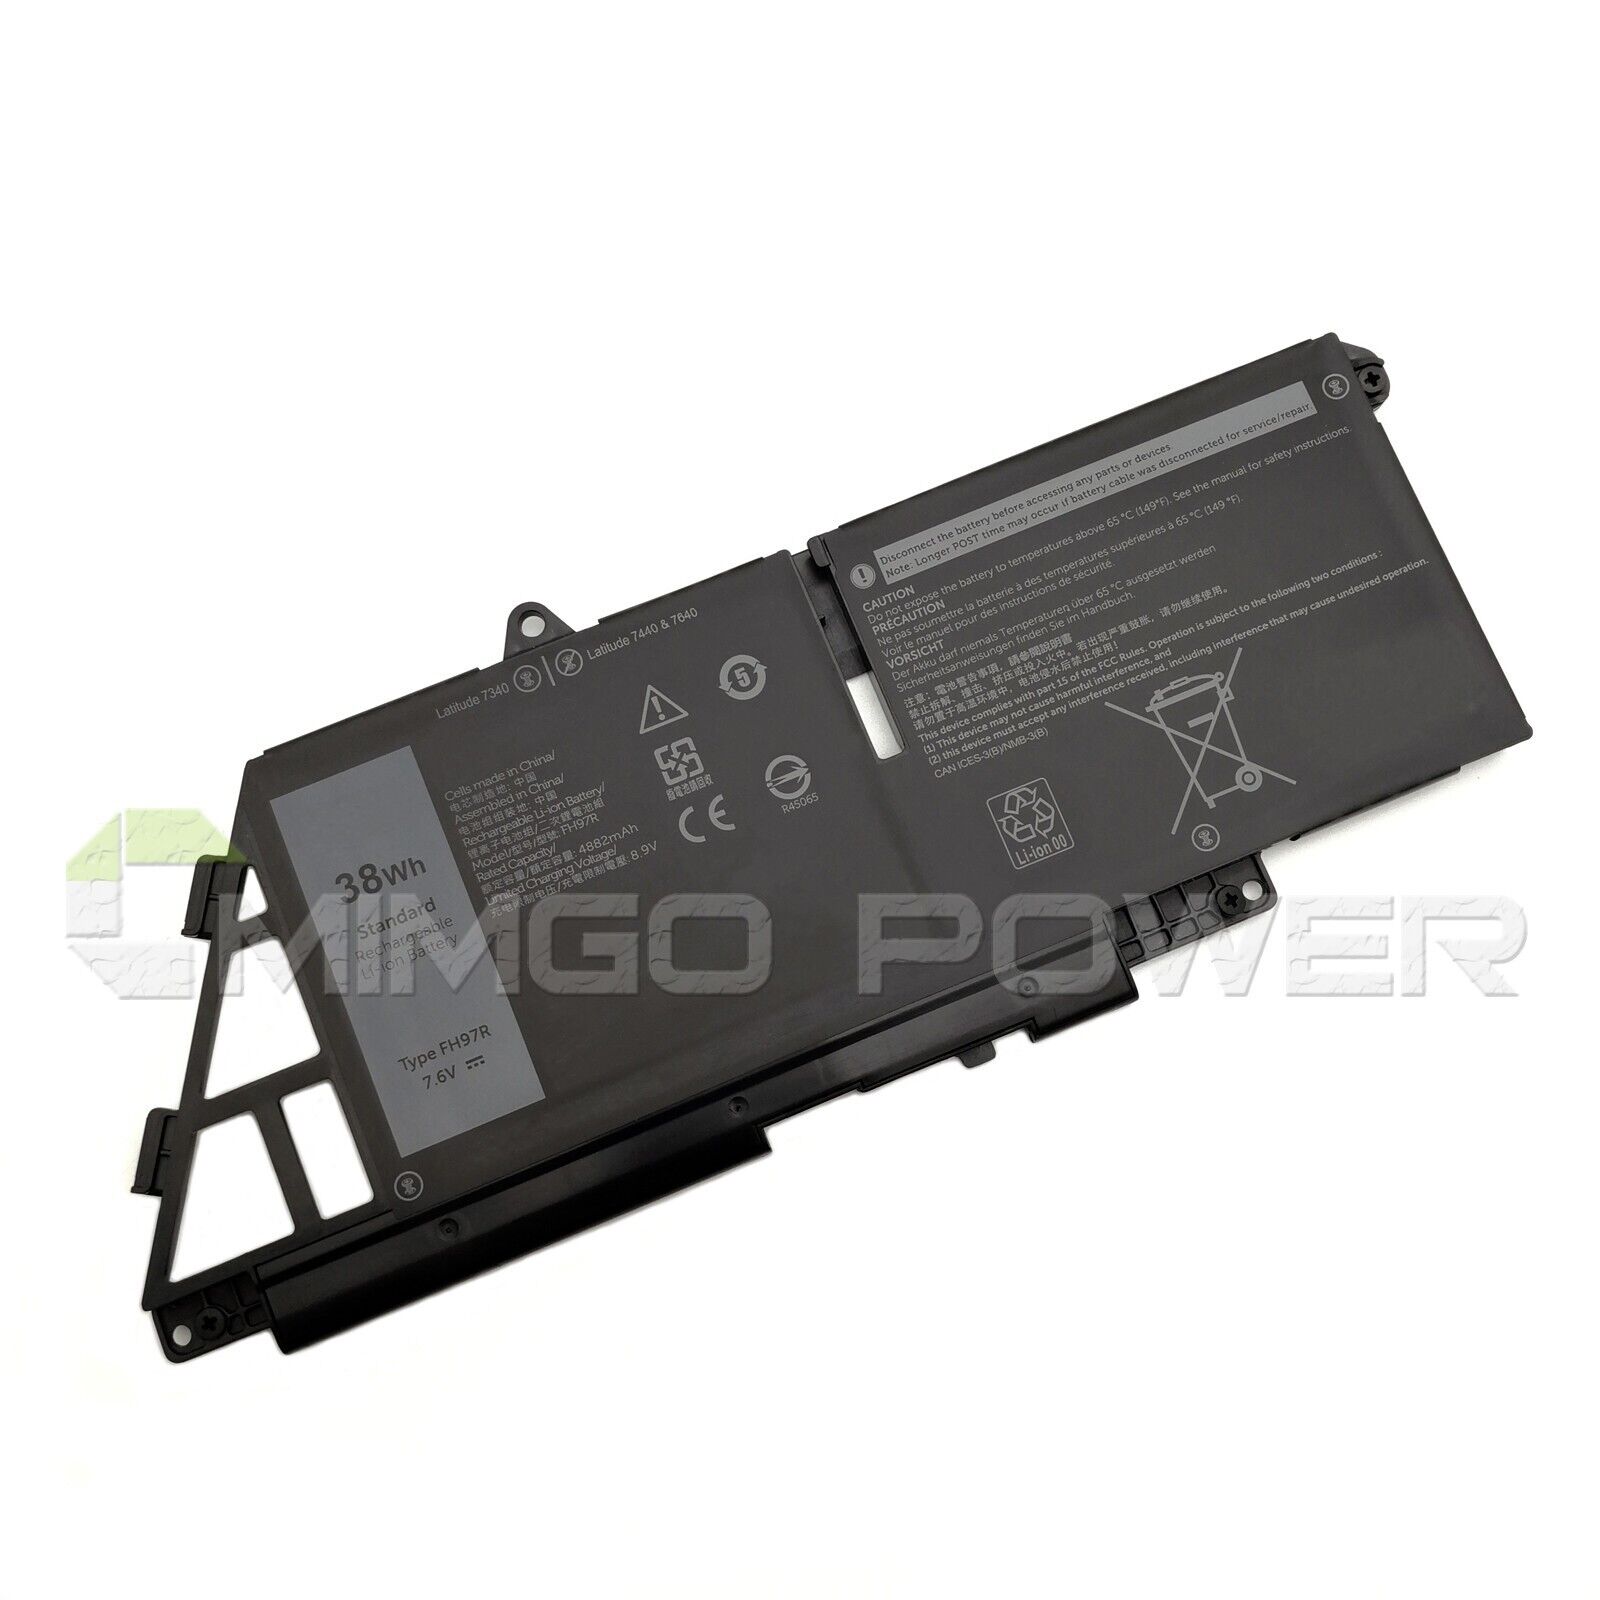 New FH97R 599M7 76KVG Battery for Dell Latitude 7340 2-IN-1 7440 7640 P179G001